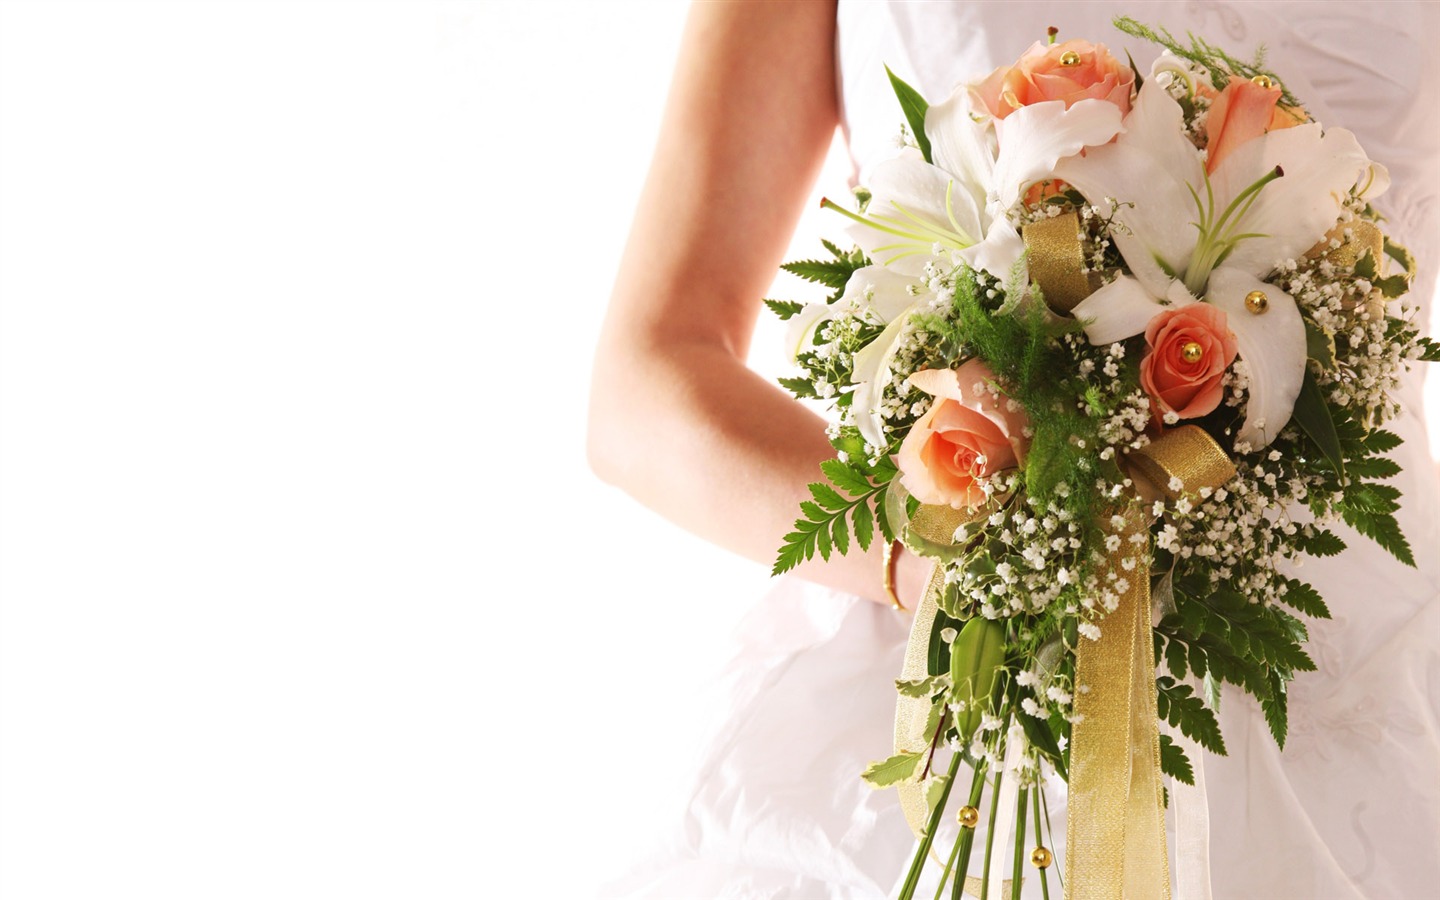 Weddings and Flowers wallpaper (1) #12 - 1440x900